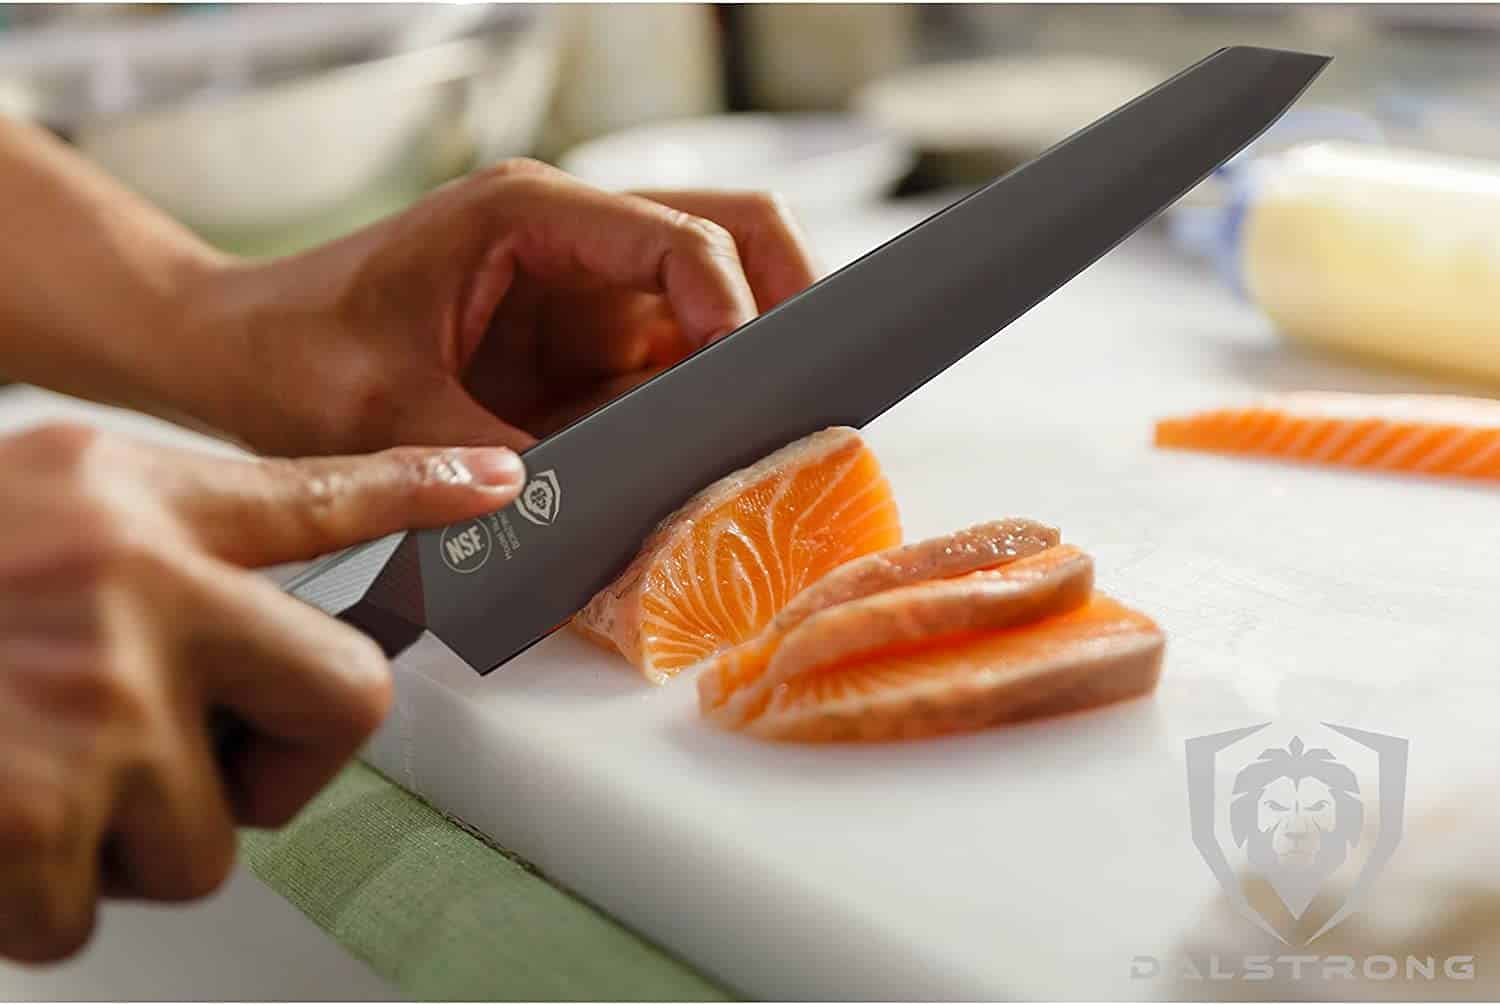 Best double-bevel yanagiba knife- DALSTRONG Shadow Black Series Sushi Knife 10.5 on table